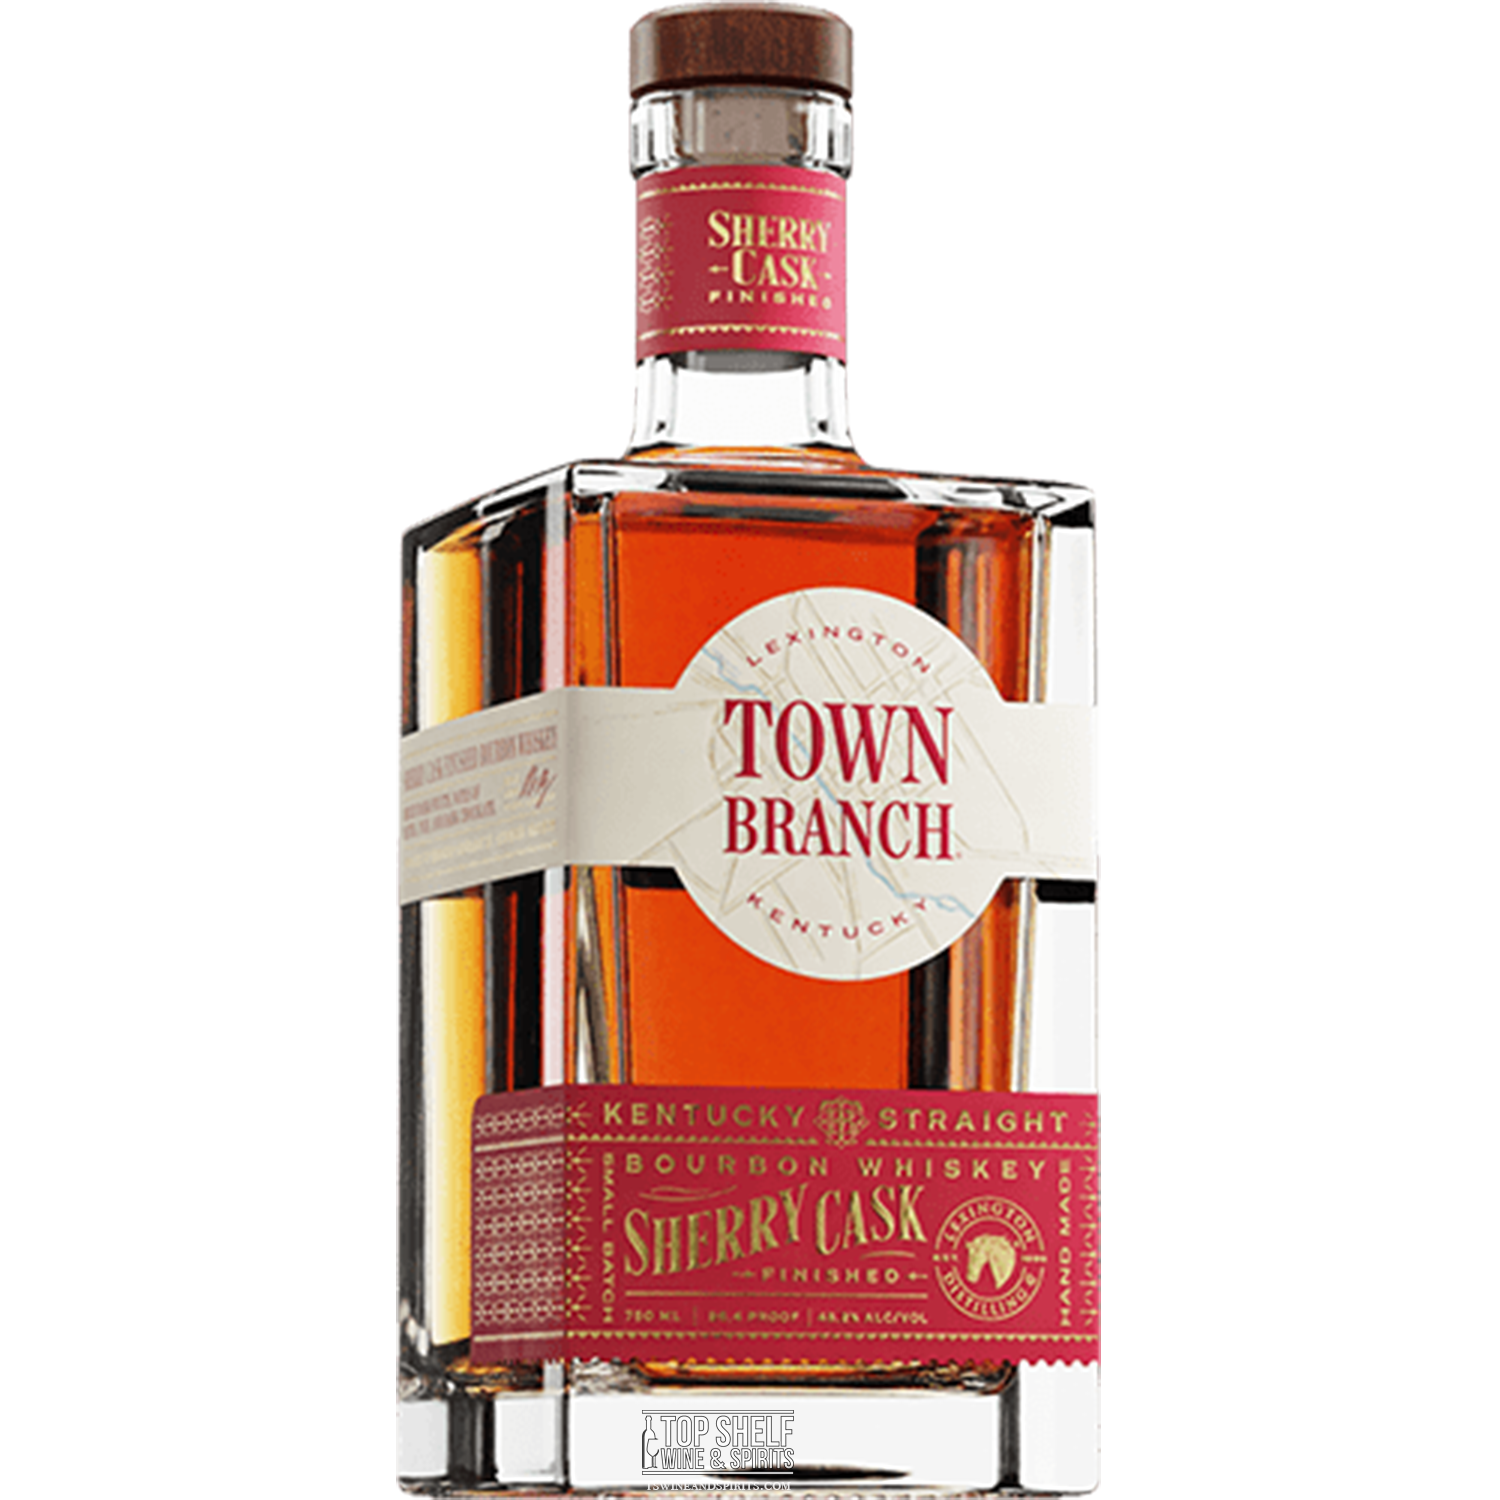 Town Branch Sherry Cask Finished Bourbon Whiskey